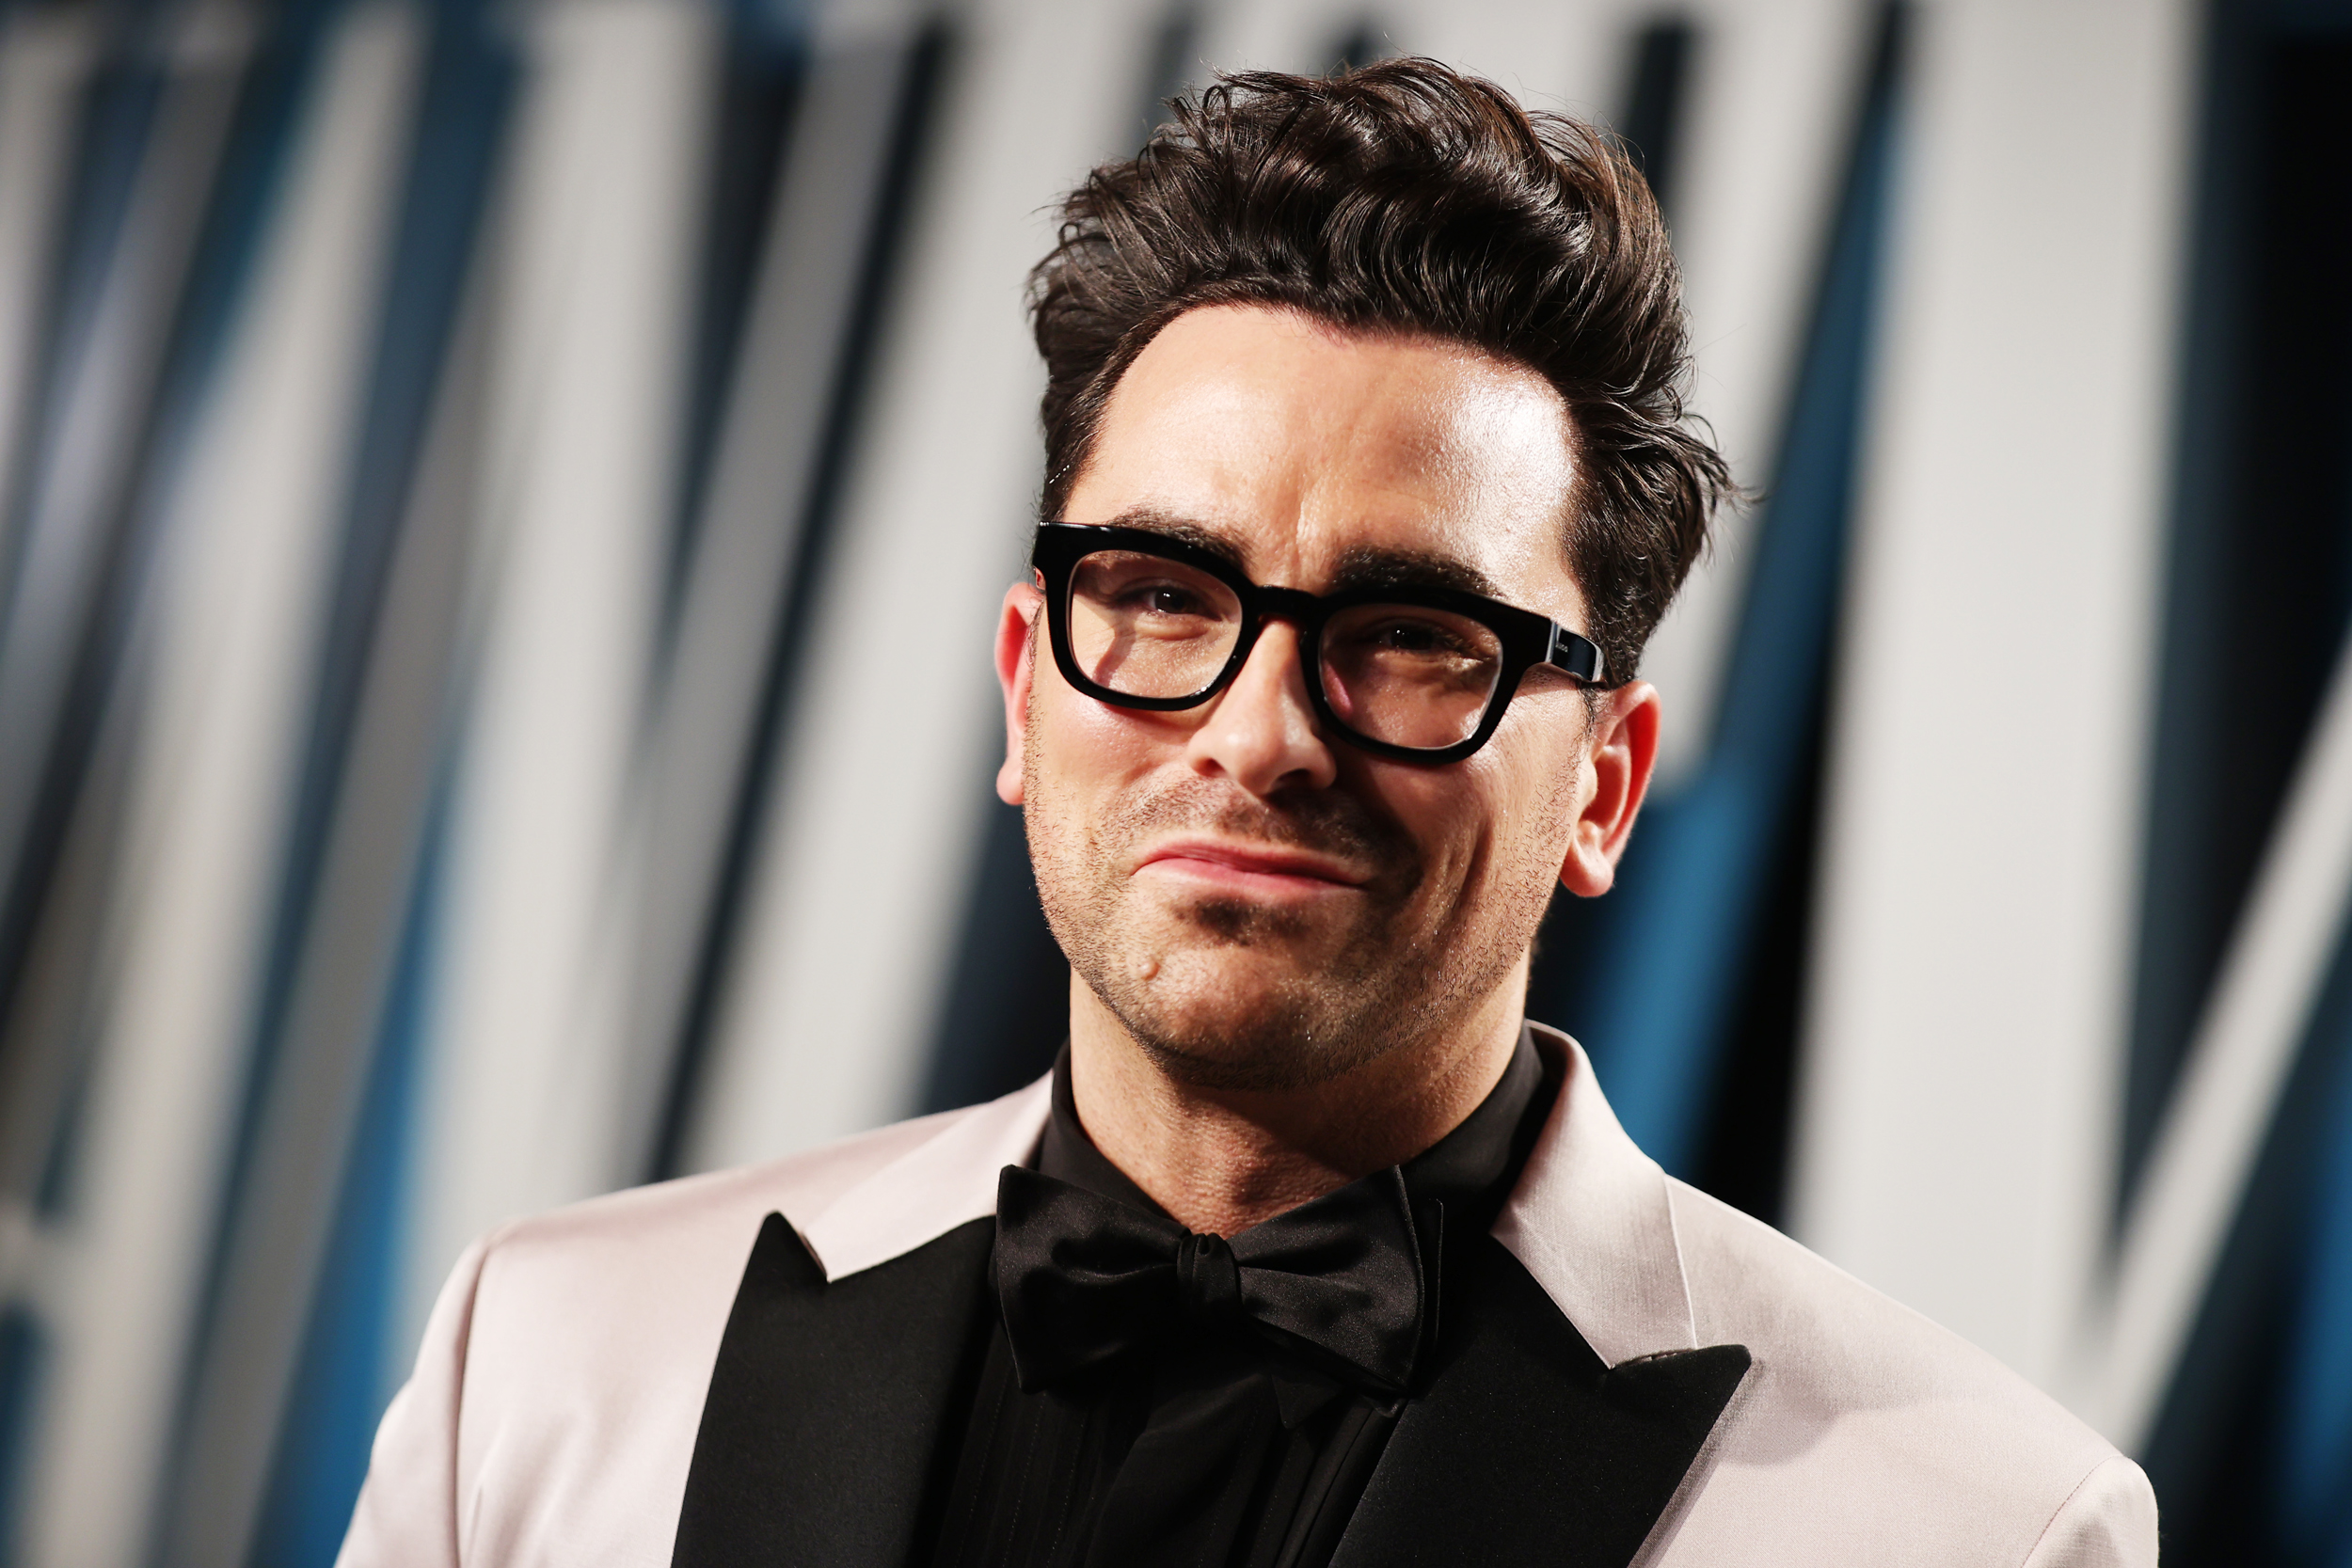  Dan Levy concocts competition series ‘The Big Brunch’ for HBO Max